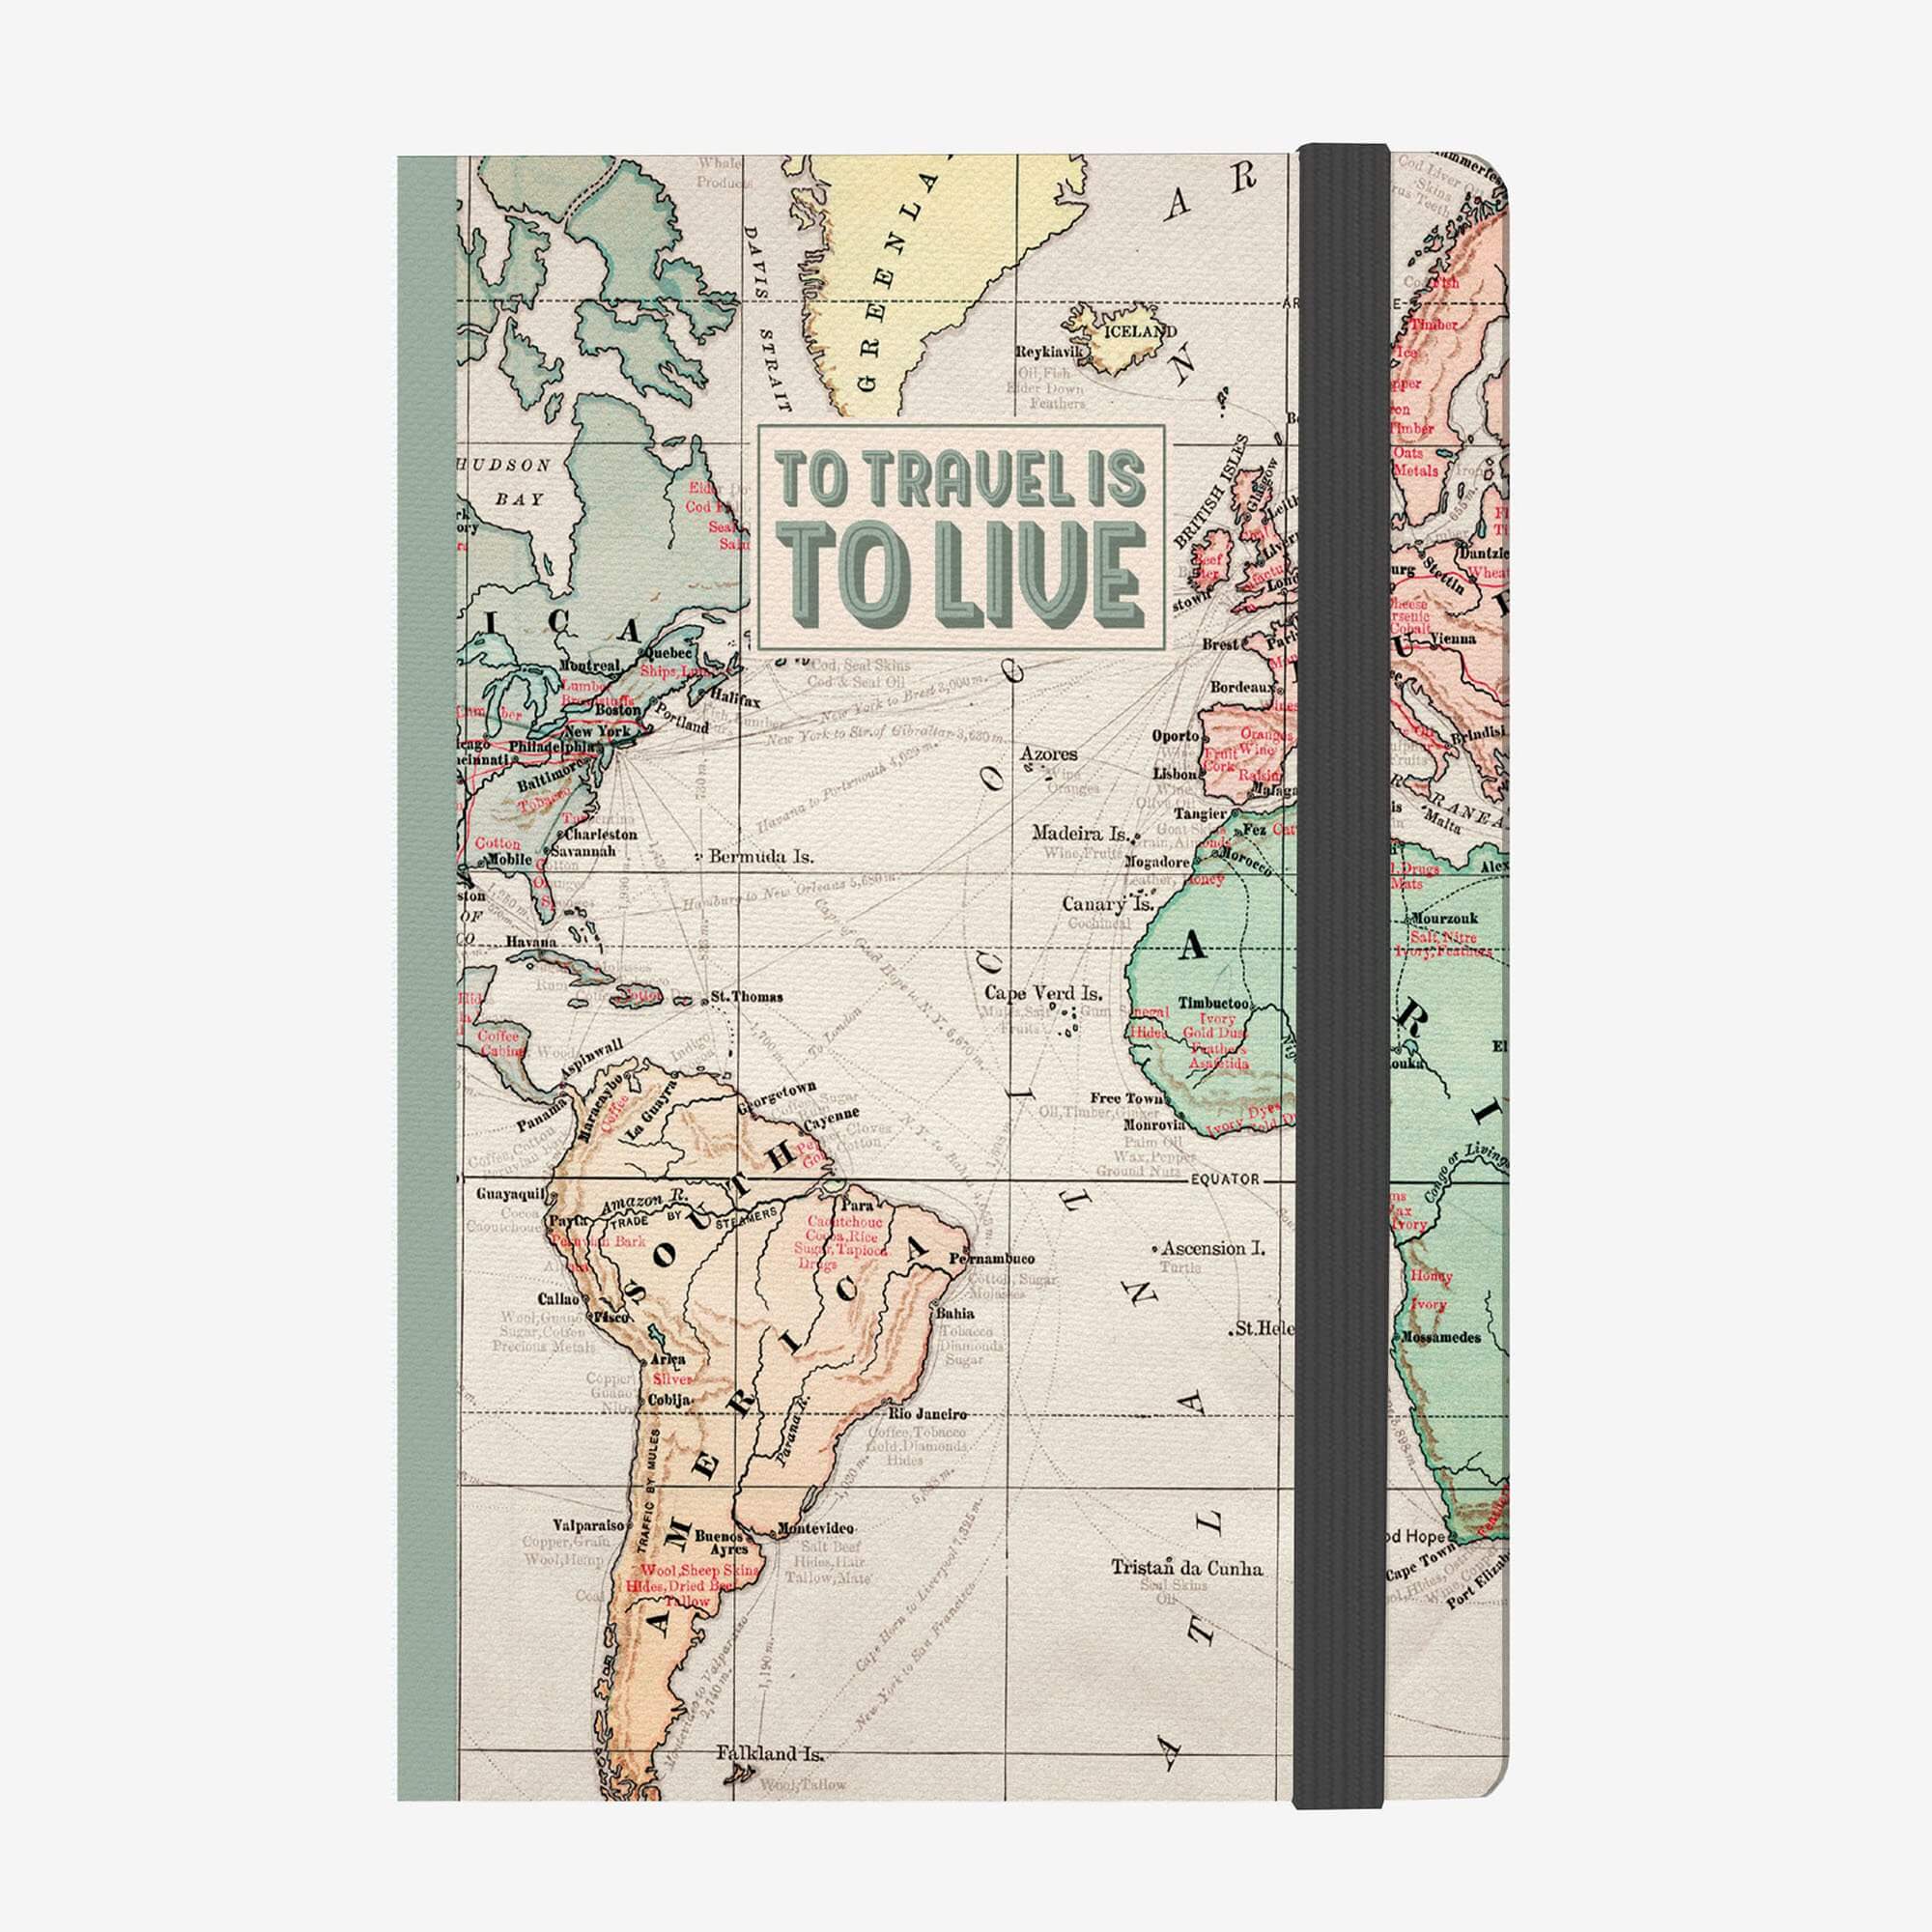 Notebook M Travel - Carnet 164 pages Legami 